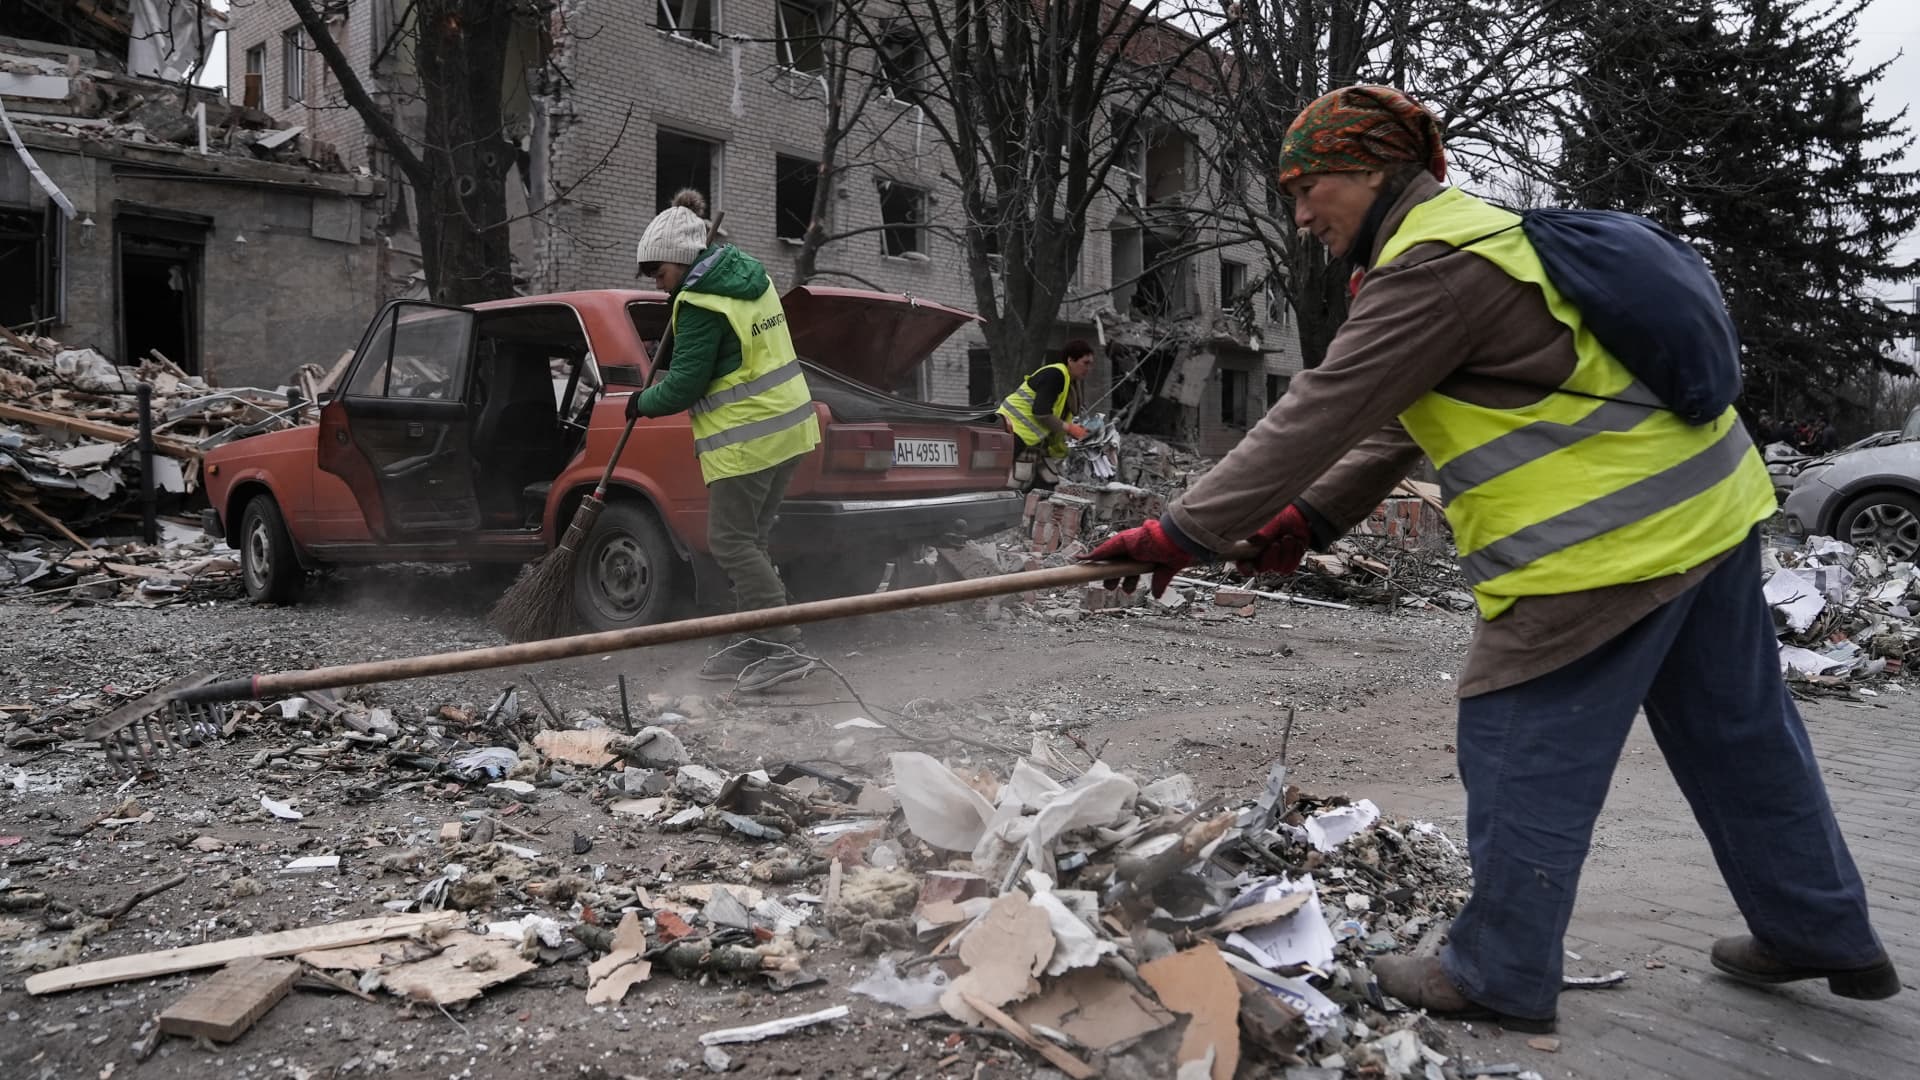 Utility workers clean up debris near destroyed buildings in the city centre on March 27, 2023 in Sloviansk, Ukraine. 